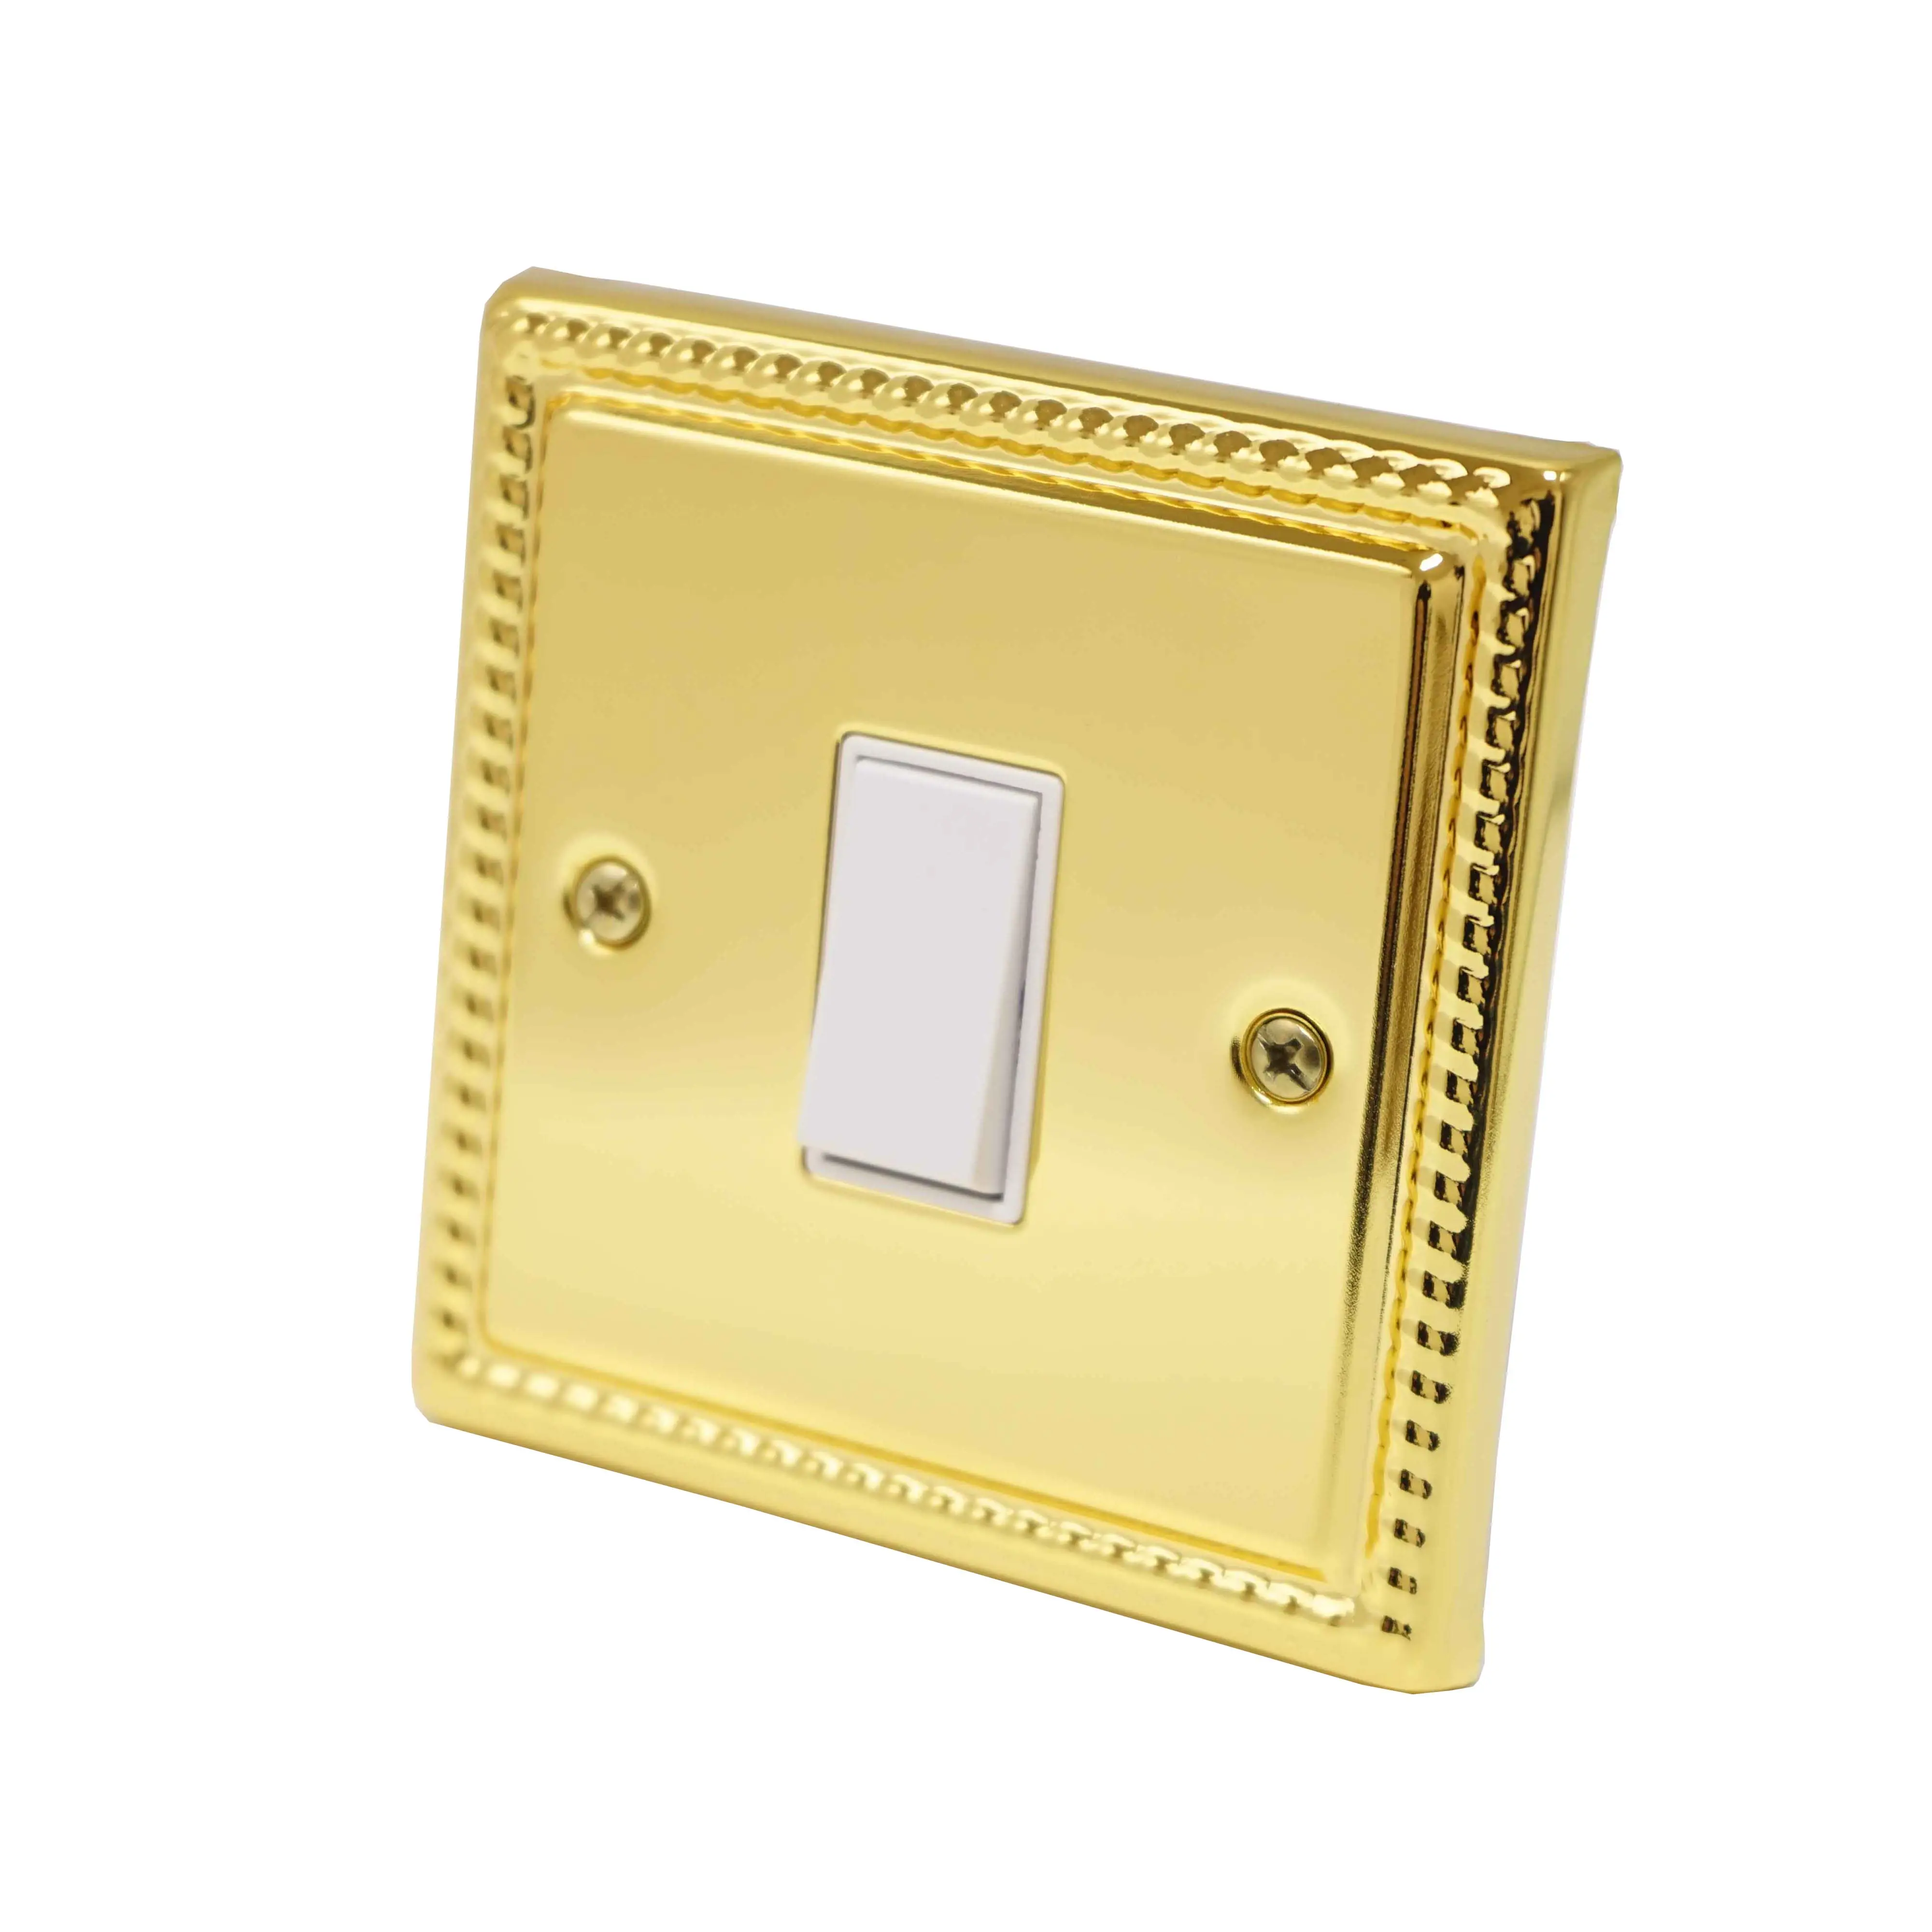 Mirror Finish Range 1 Gang 2 Way Switch Electroplated Gold Color Metal 304 Stainless Steel 86 3*3 Plate